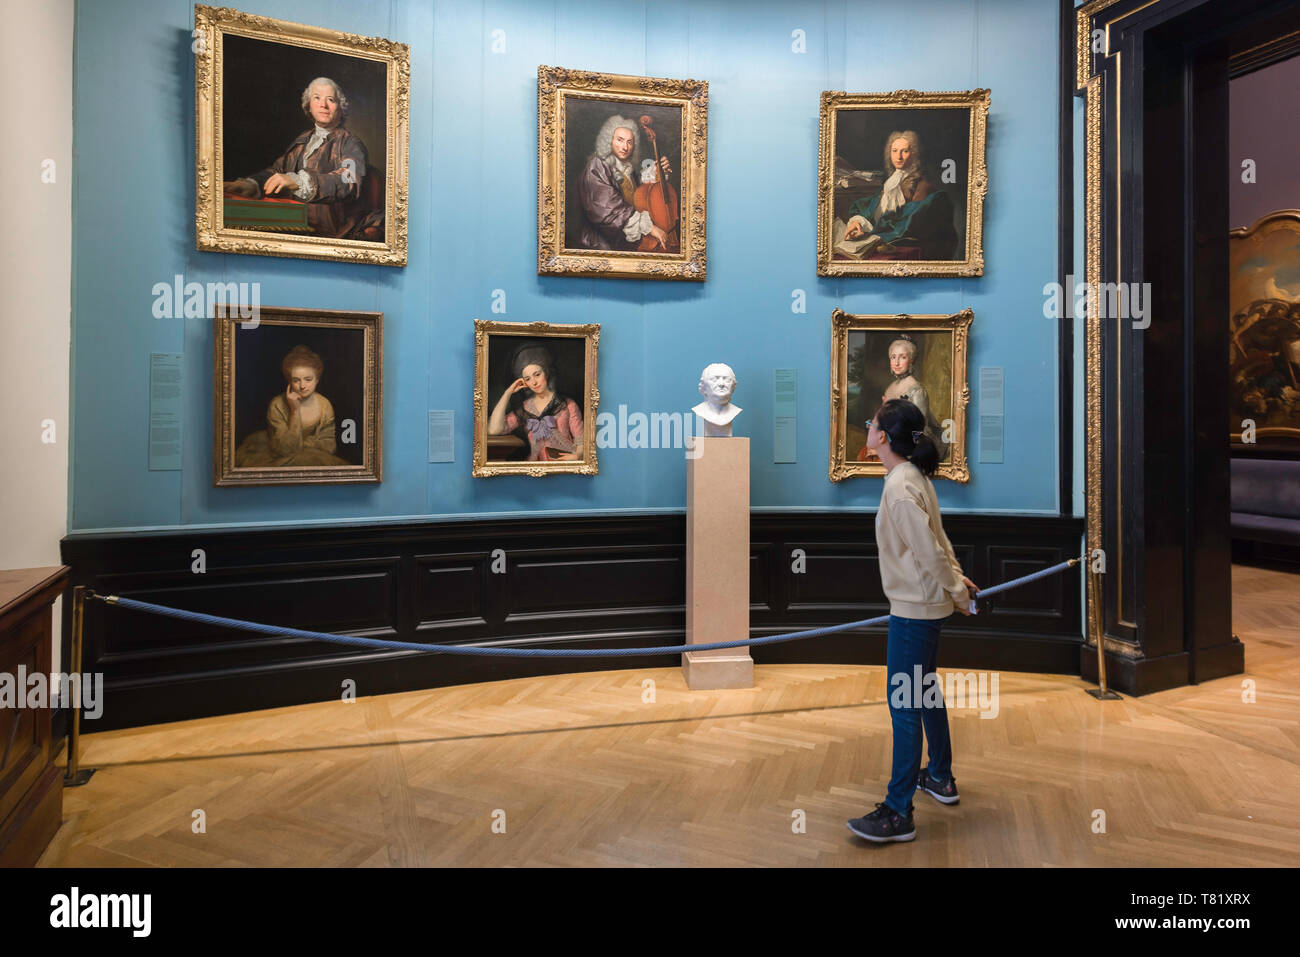 Young woman art, view of a young woman looking at historic 18th century portraits inside the Kunsthistorisches Museum in Vienna, Wien, Austria. Stock Photo